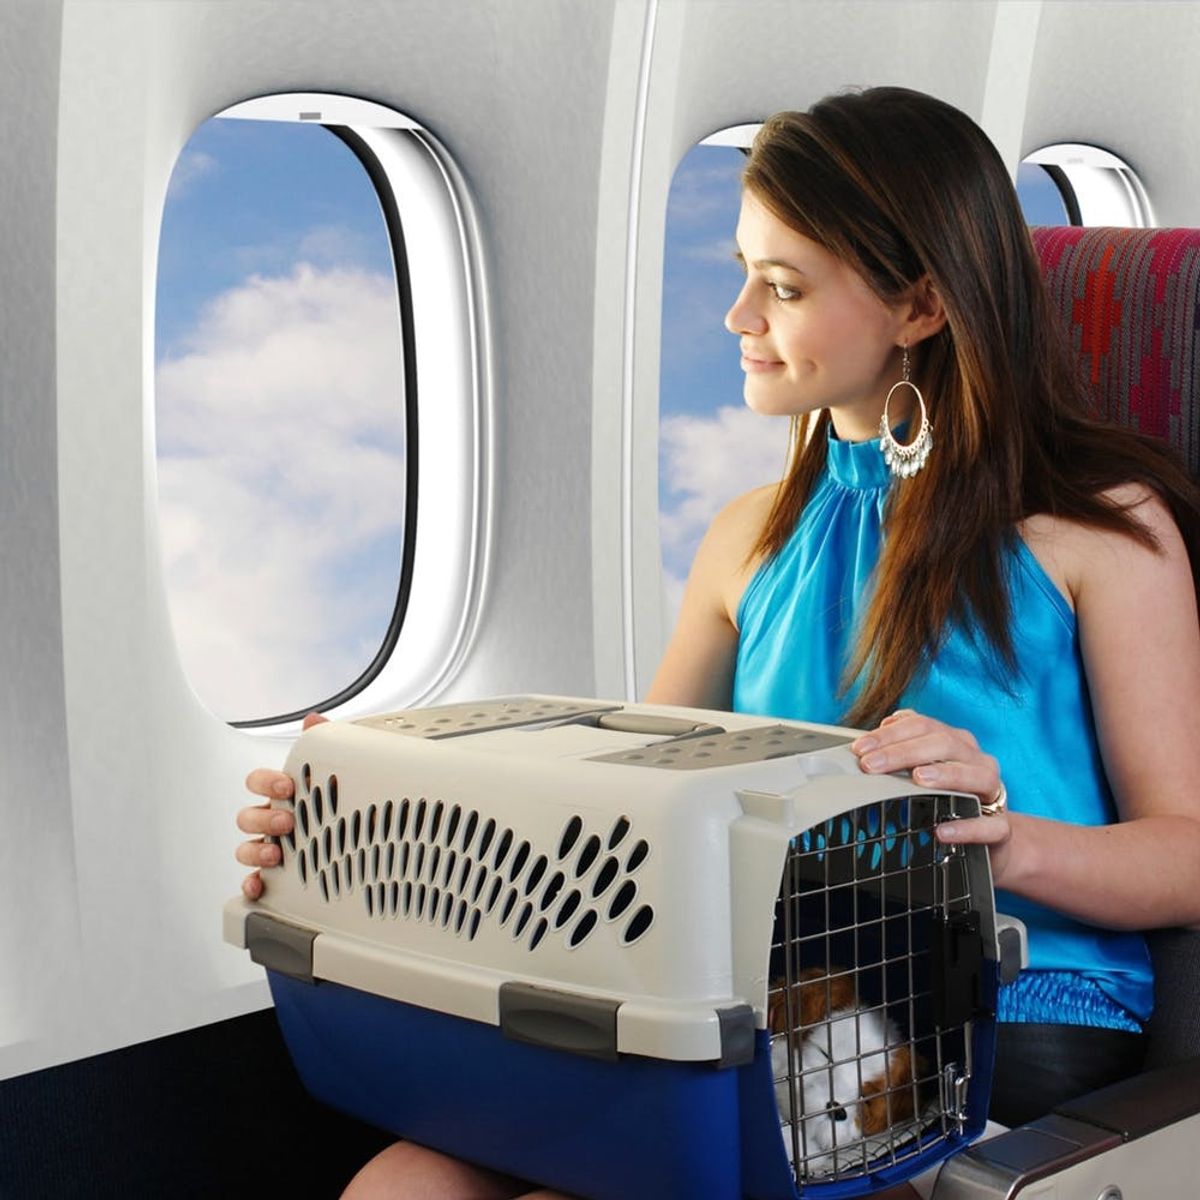 10 Expert Tips for Bringing Your Dog on an Airplane